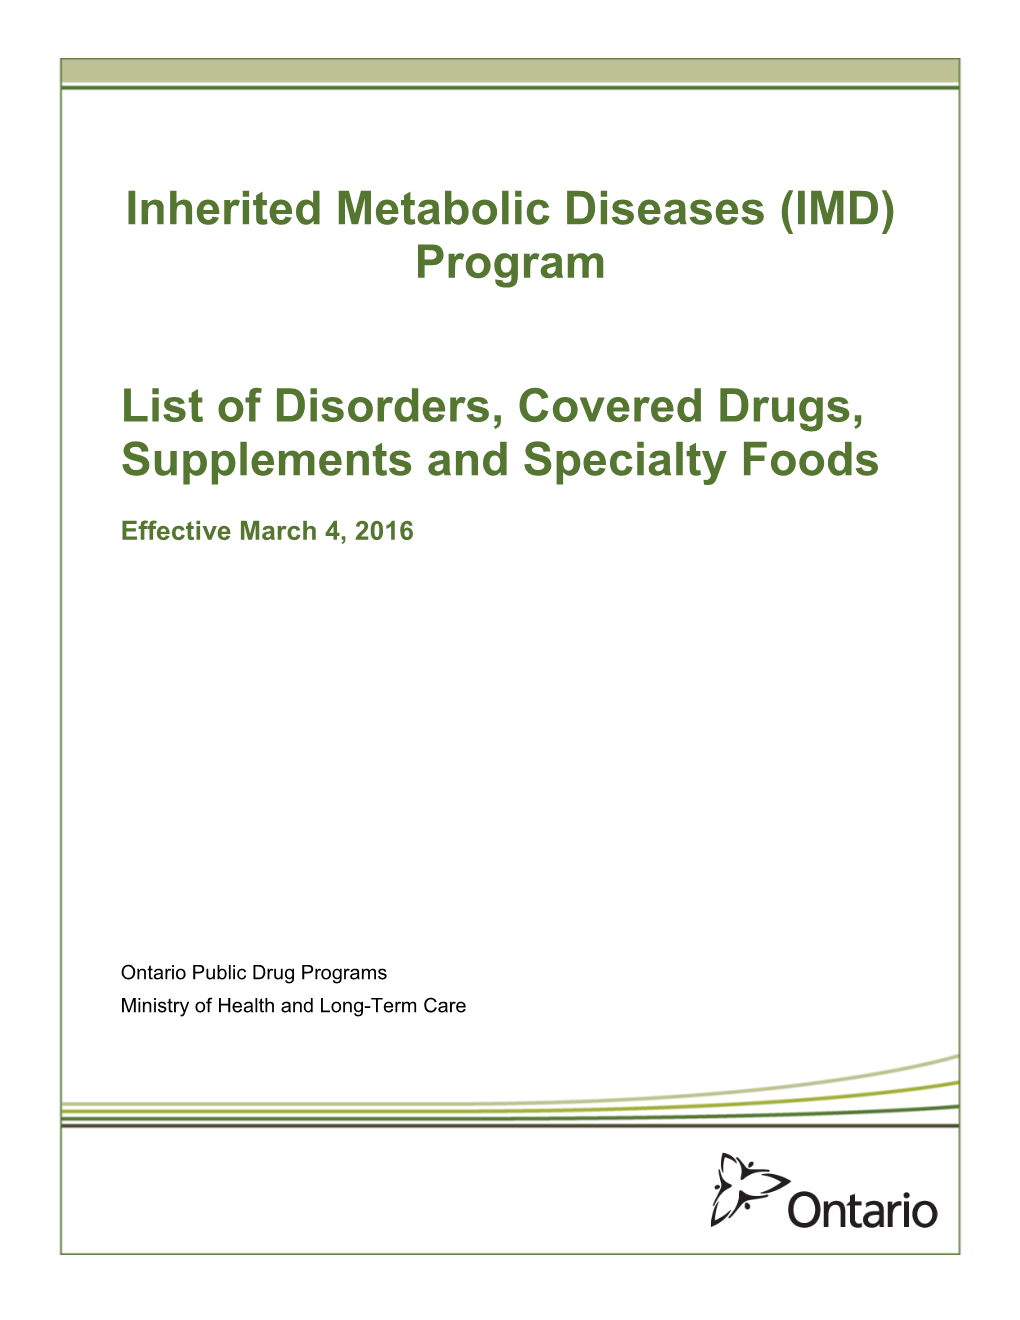 IMD Program List of Disorders, Covered Drugs, Supplements And